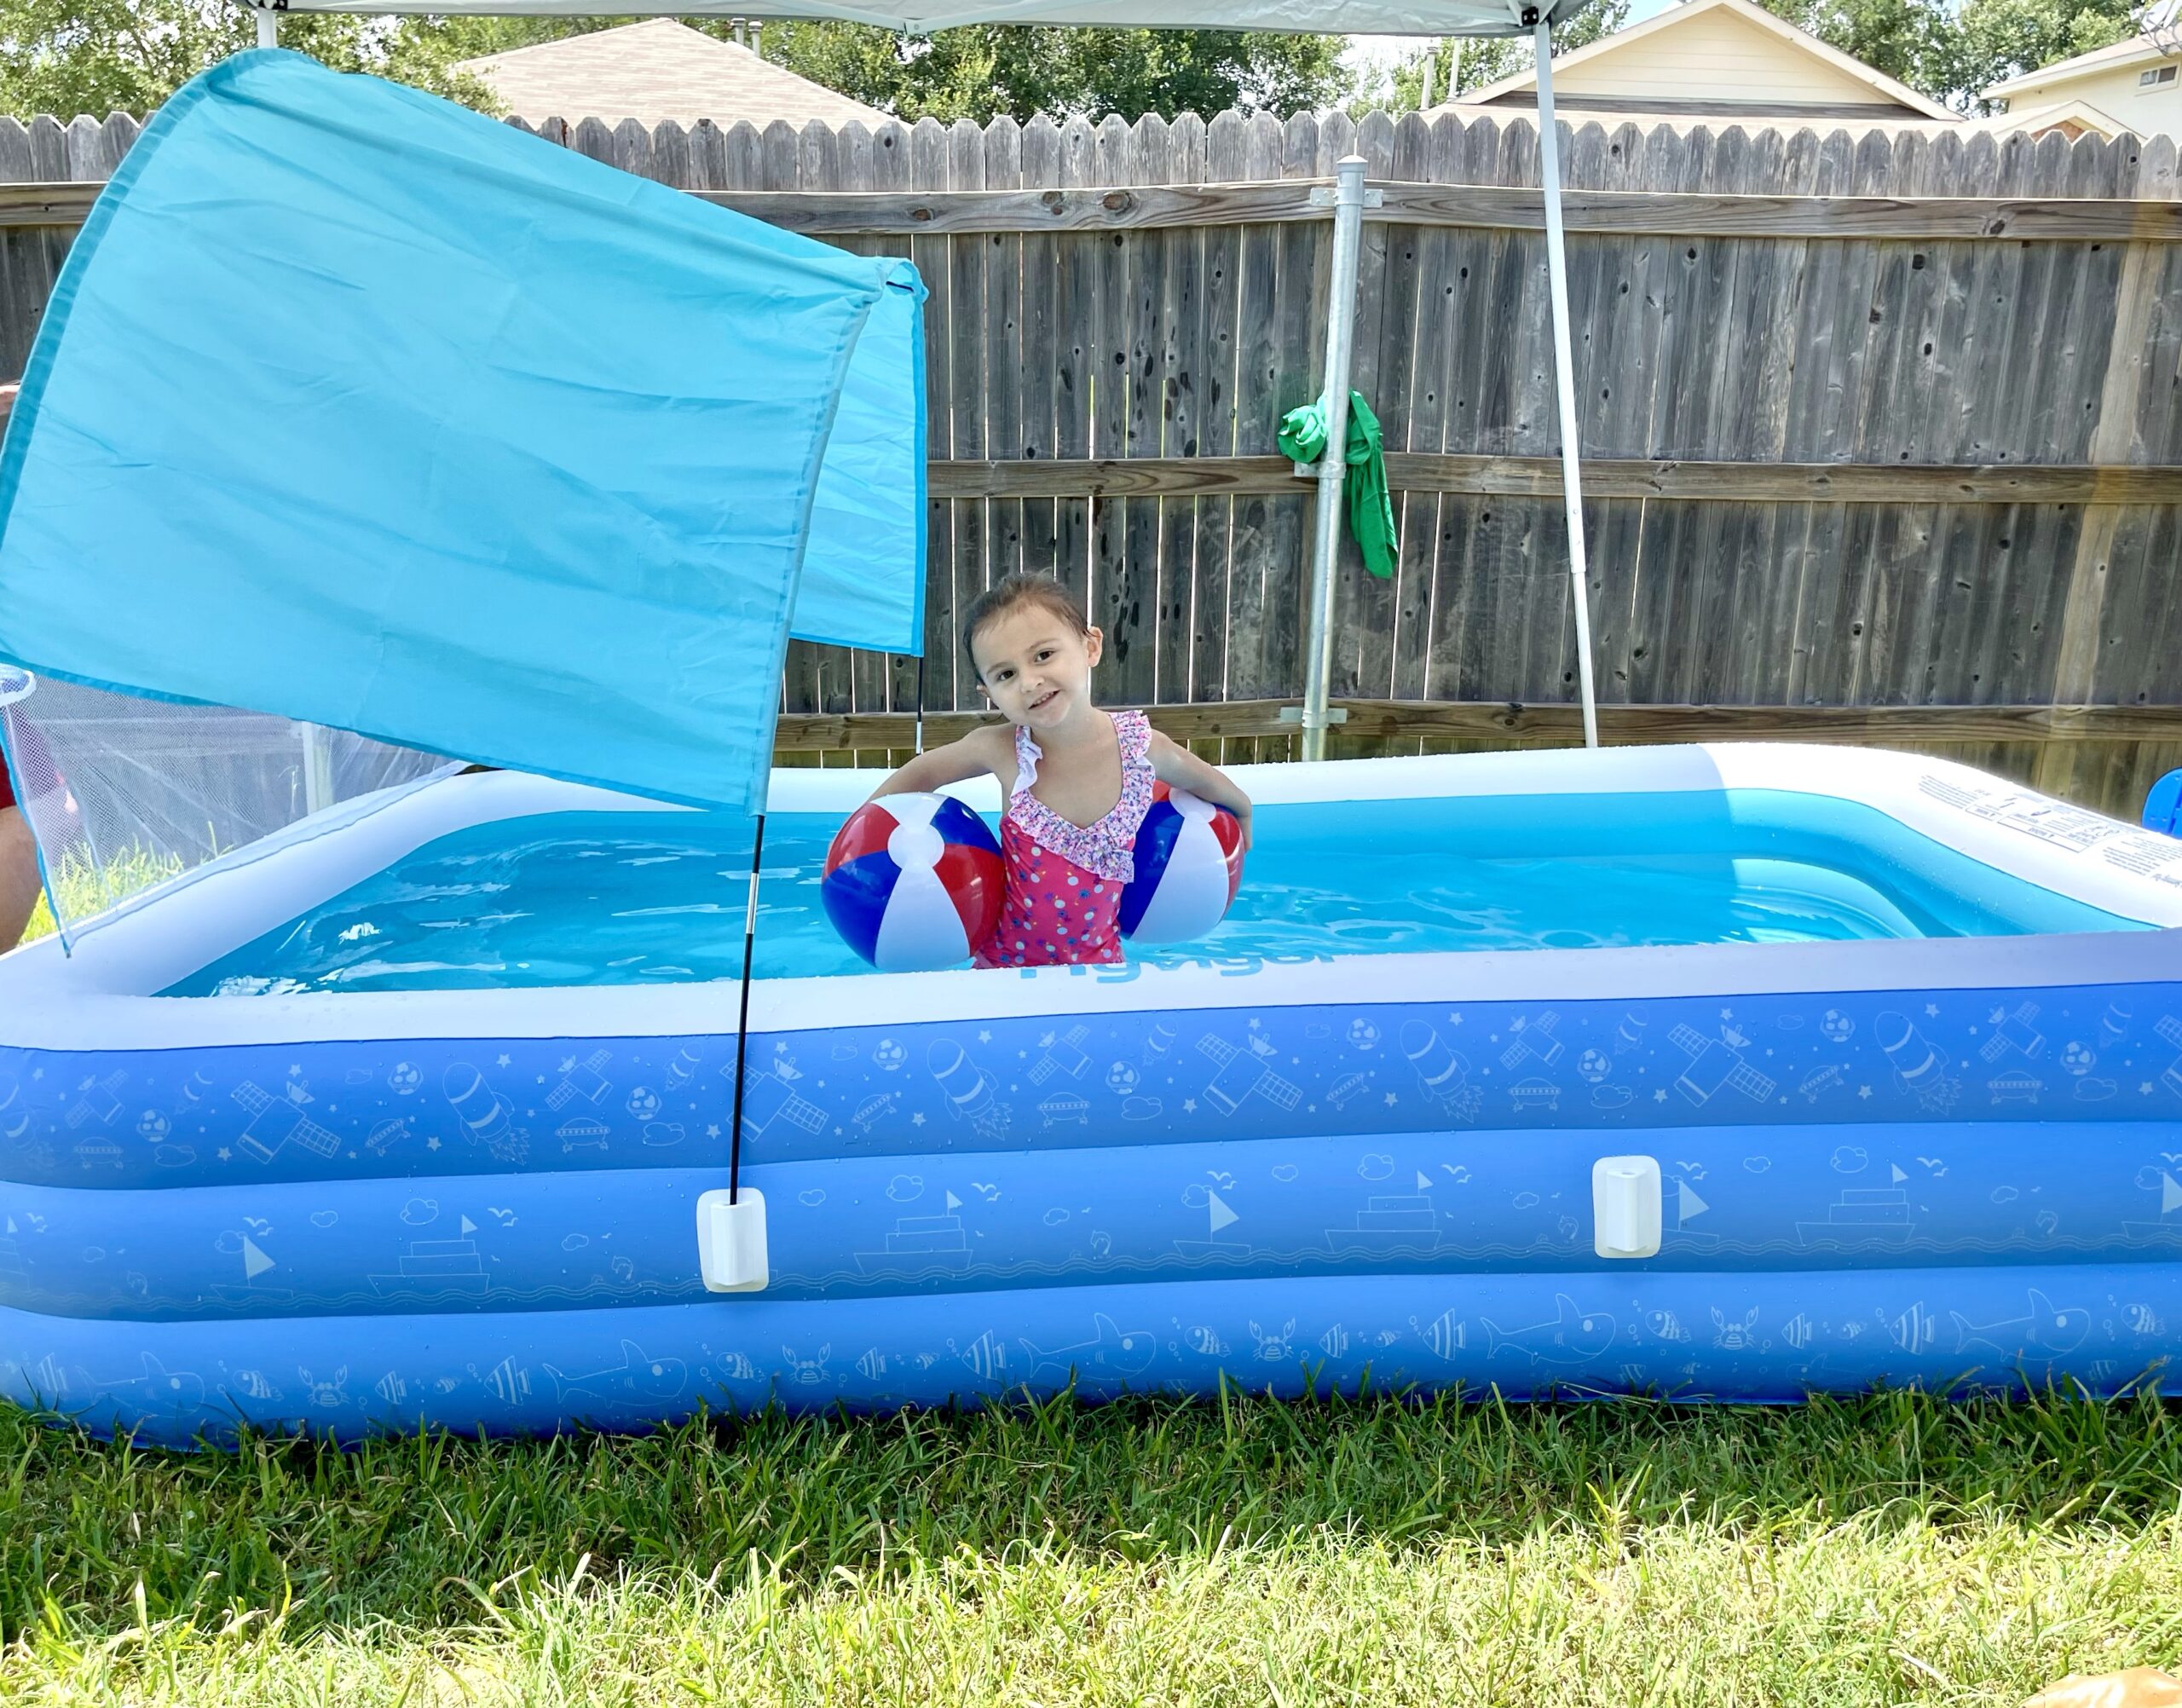 Best Inflatable Pool, Family Pool from Hyvigor